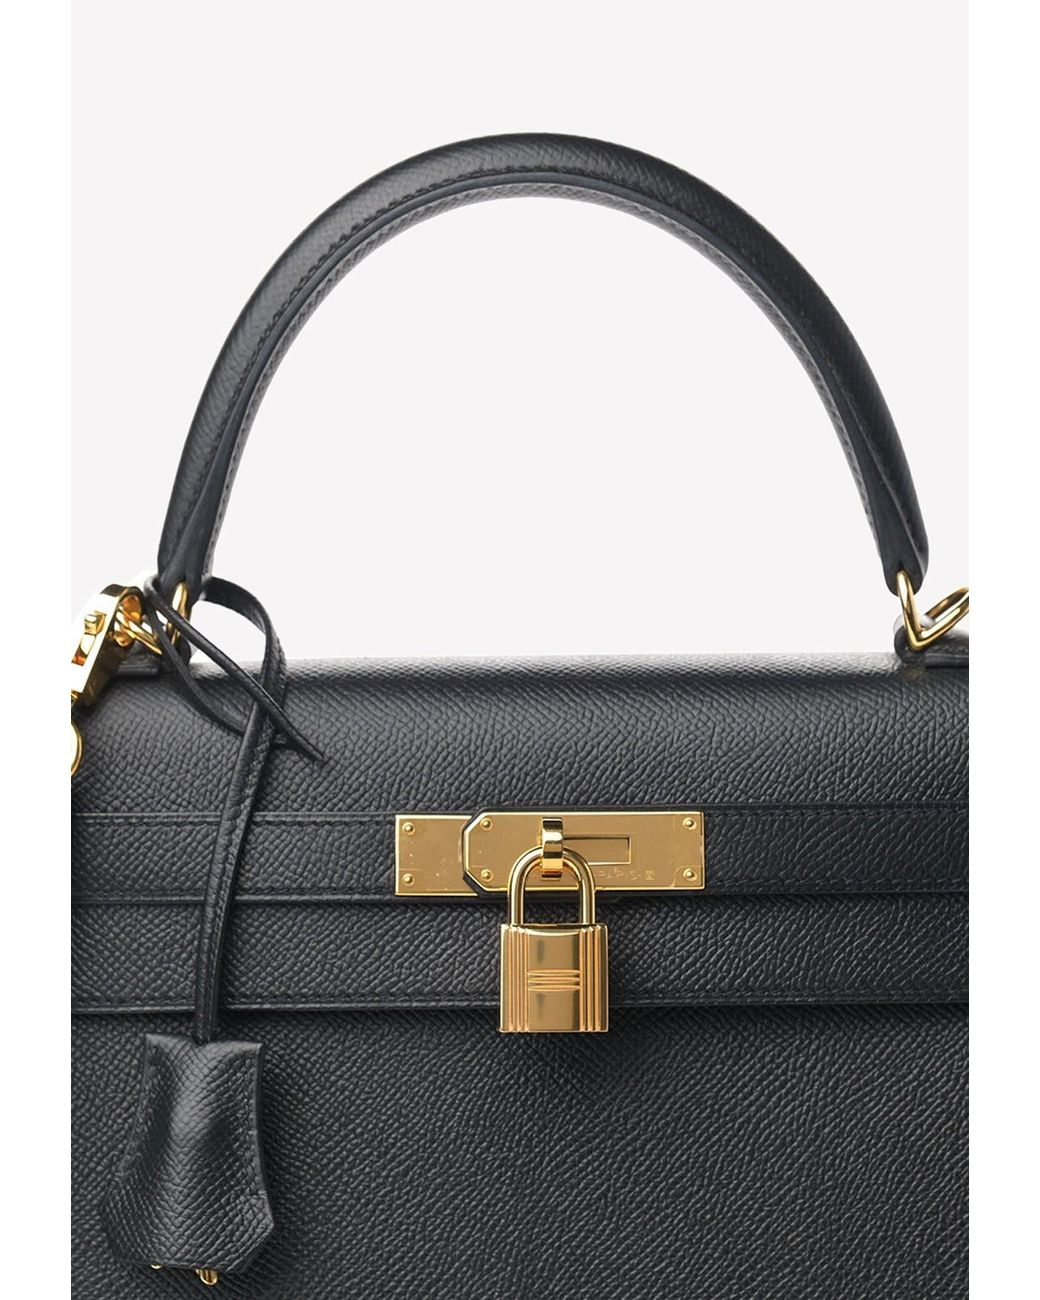 Hermès Black Sellier Kelly 28cm of Epsom Leather with Gold